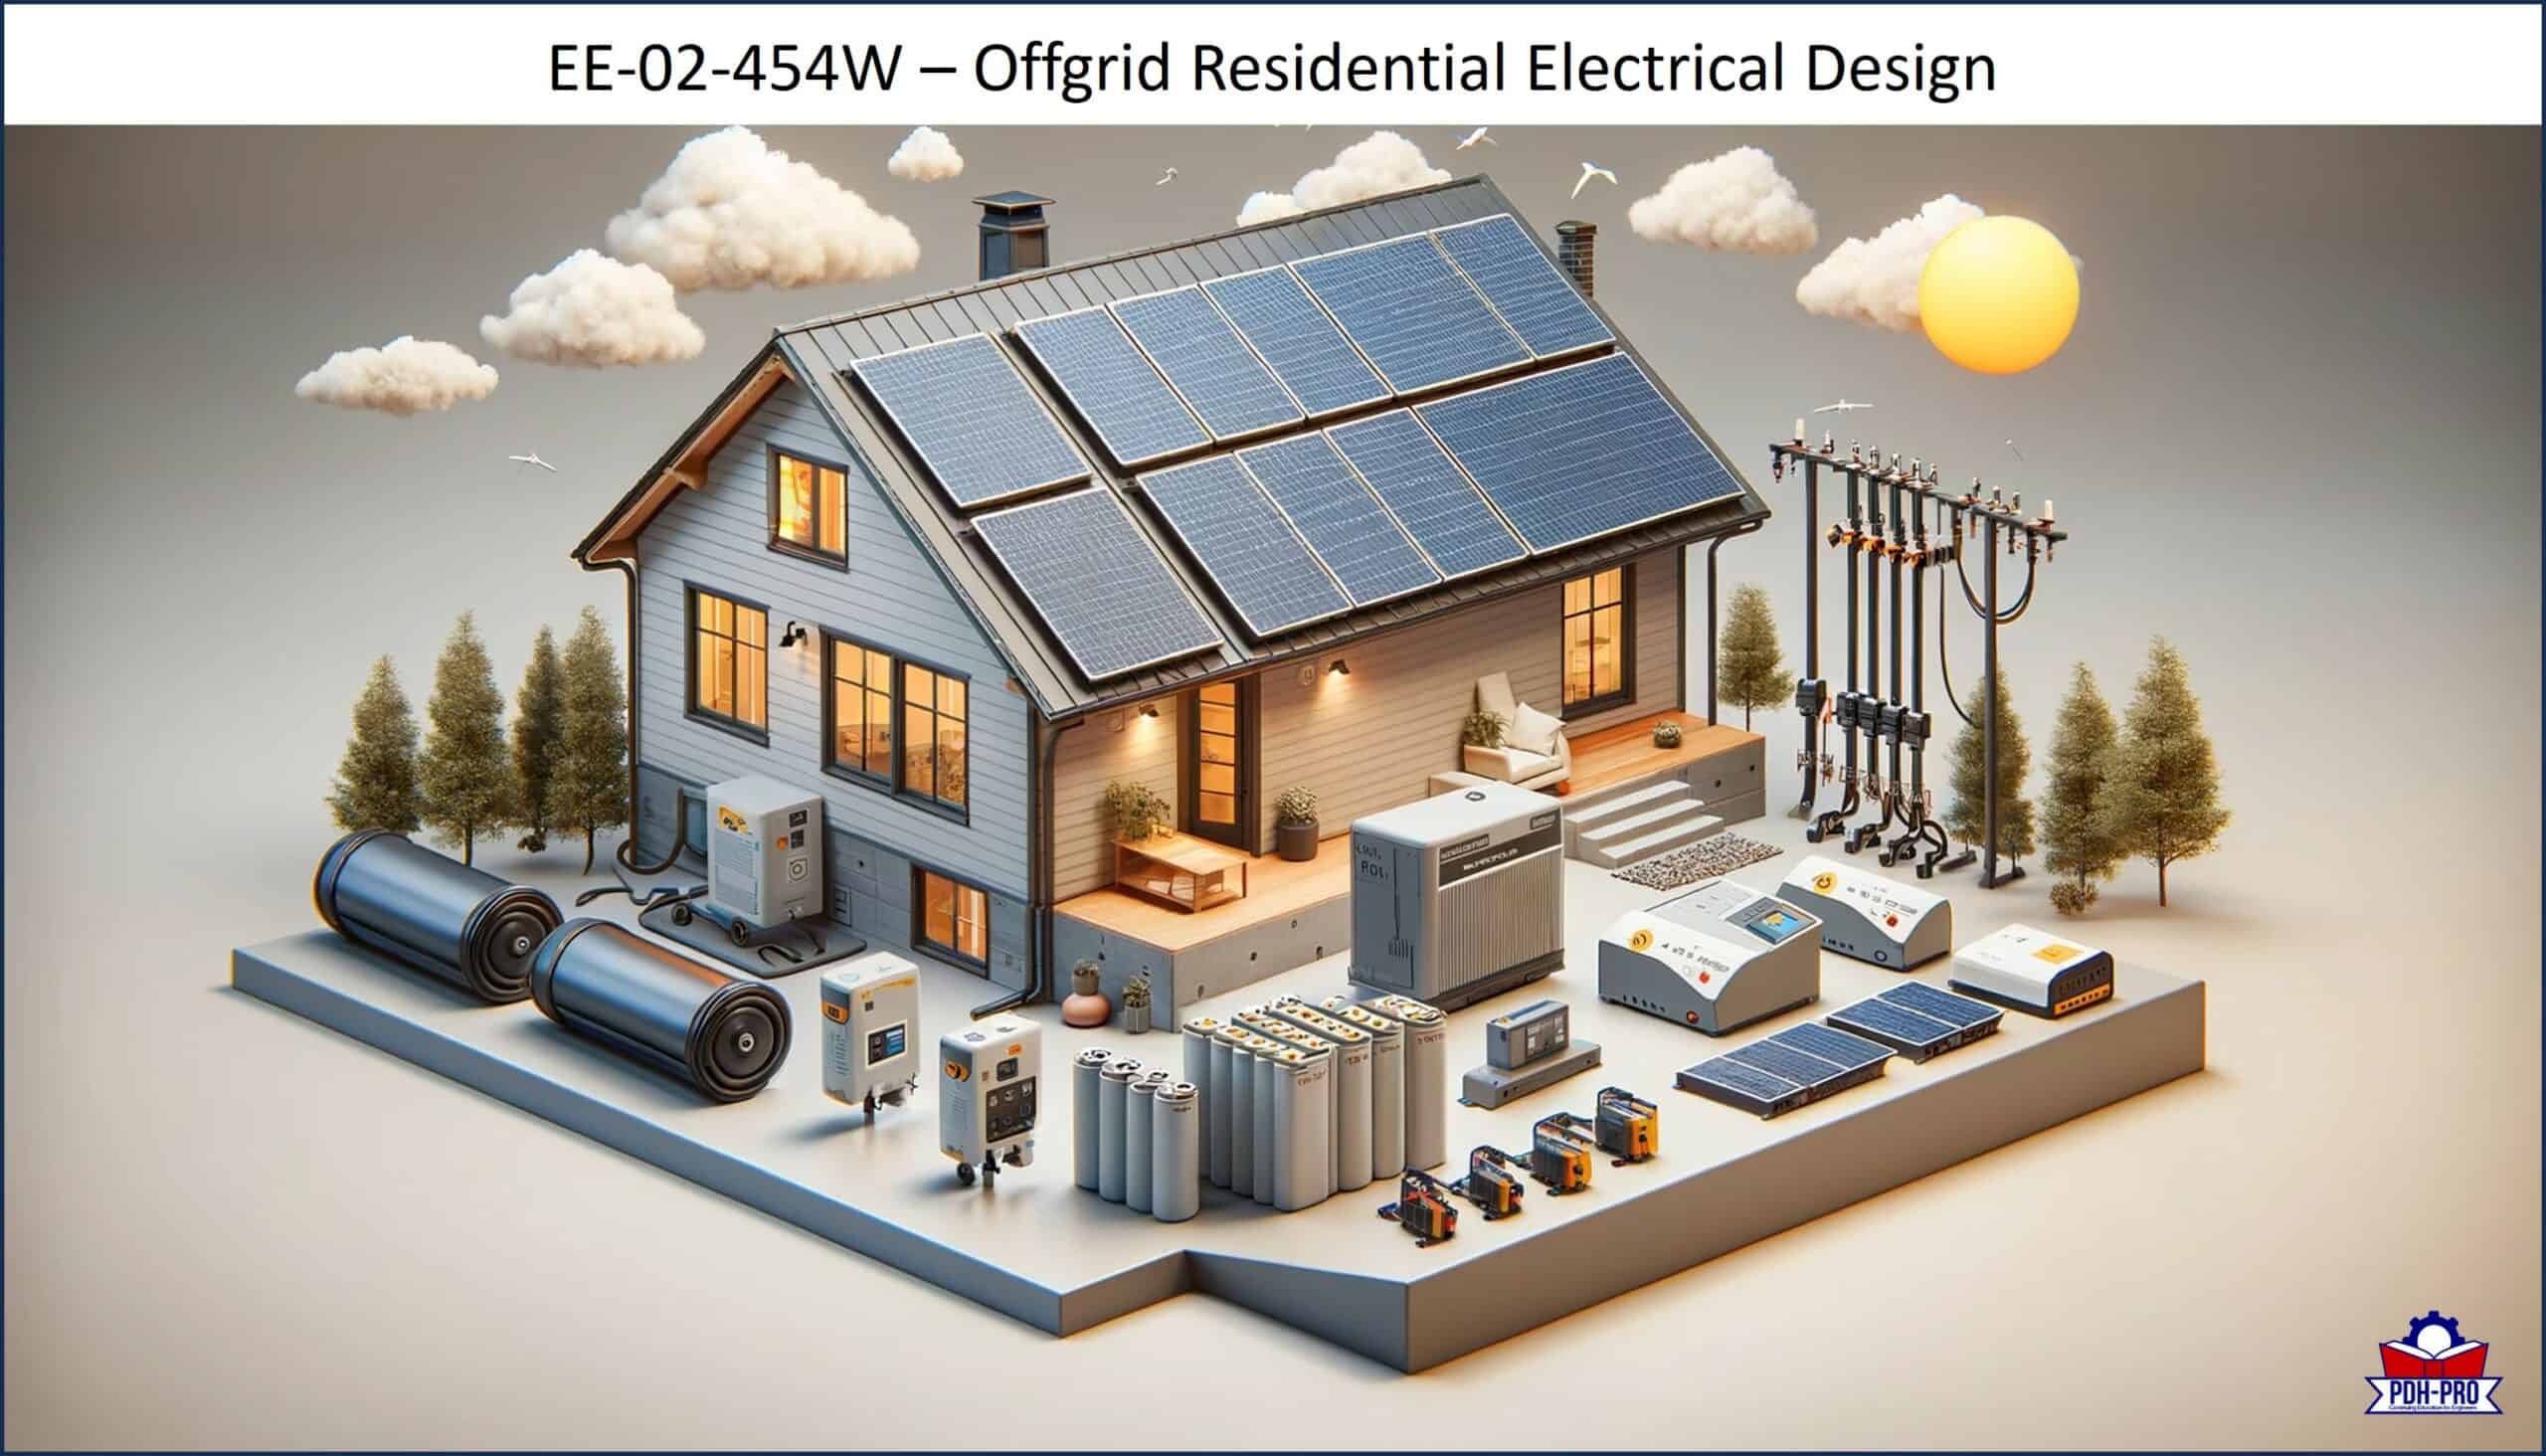 Offgrid Residential Electrical Design